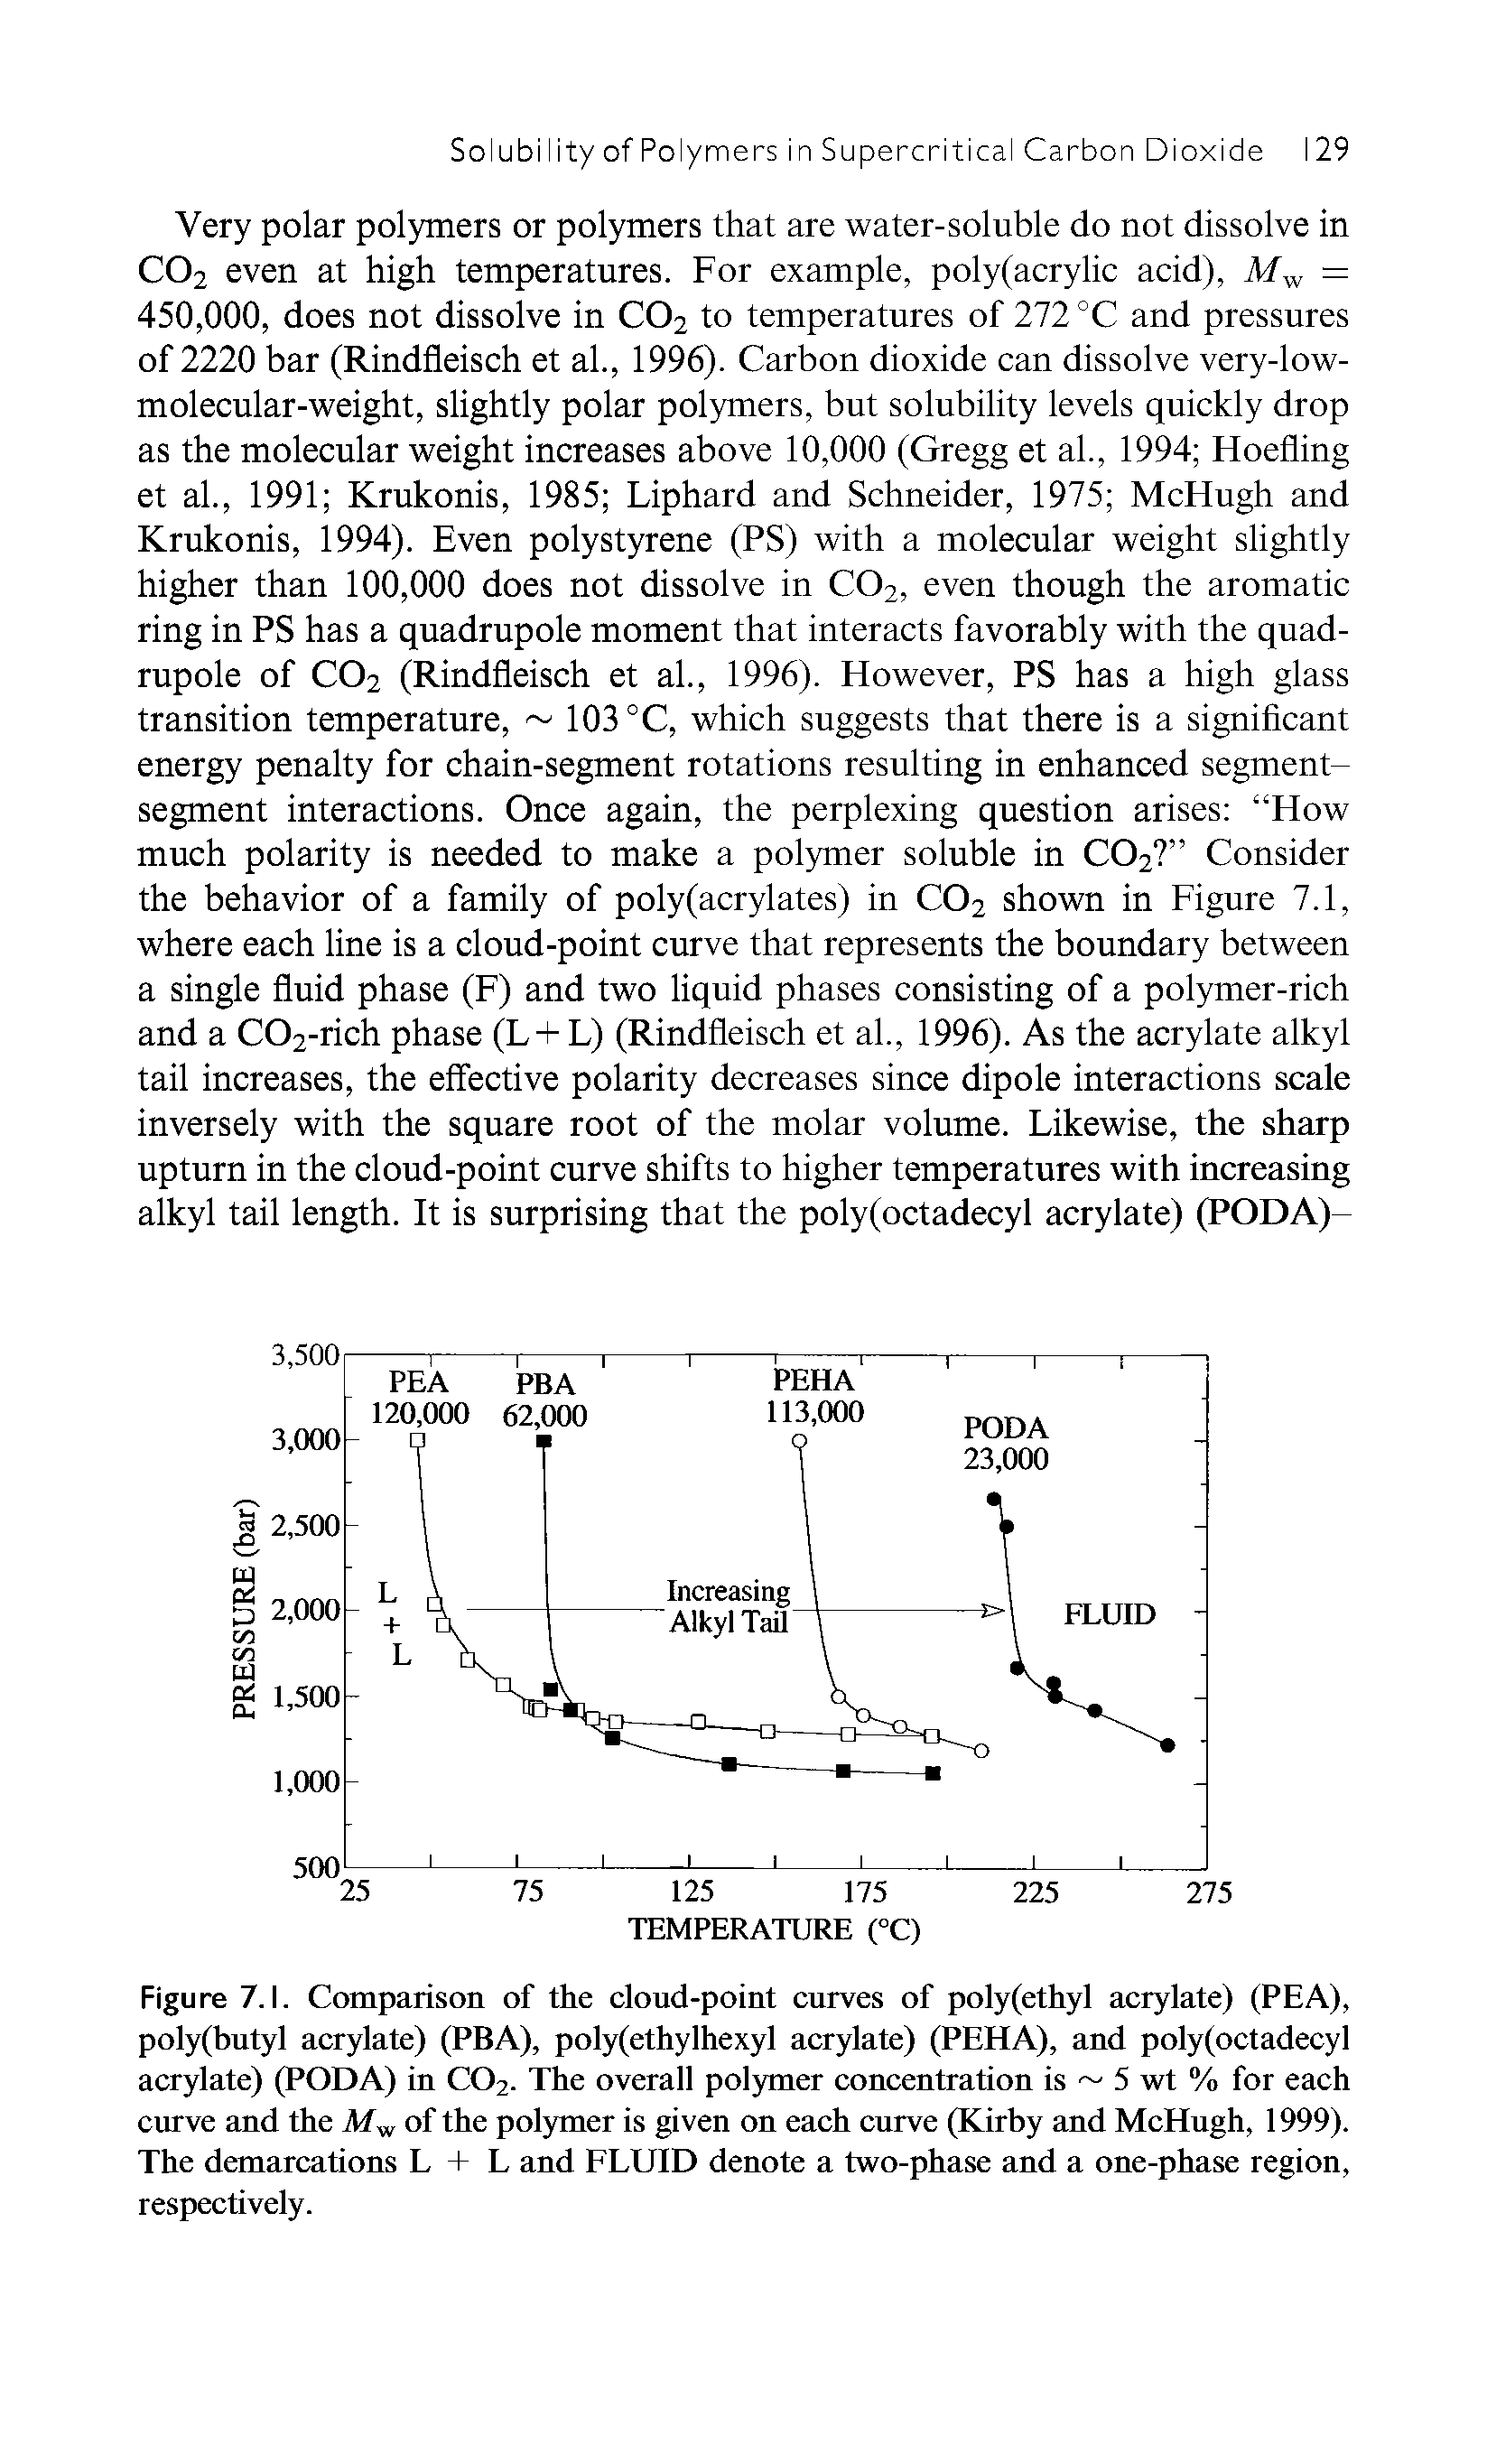 Figure 7.1. Comparison of the cloud-point curves of poly(ethyl acrylate) (PEA), poly(butyl acrylate) (PBA), poly(ethylhexyl acrylate) (PEHA), and poly(octadecyl acrylate) (PODA) in C02. The overall polymer concentration is 5 wt % for each curve and the Mw of the polymer is given on each curve (Kirby and McHugh, 1999). The demarcations L + L and FLUID denote a two-phase and a one-phase region, respectively.